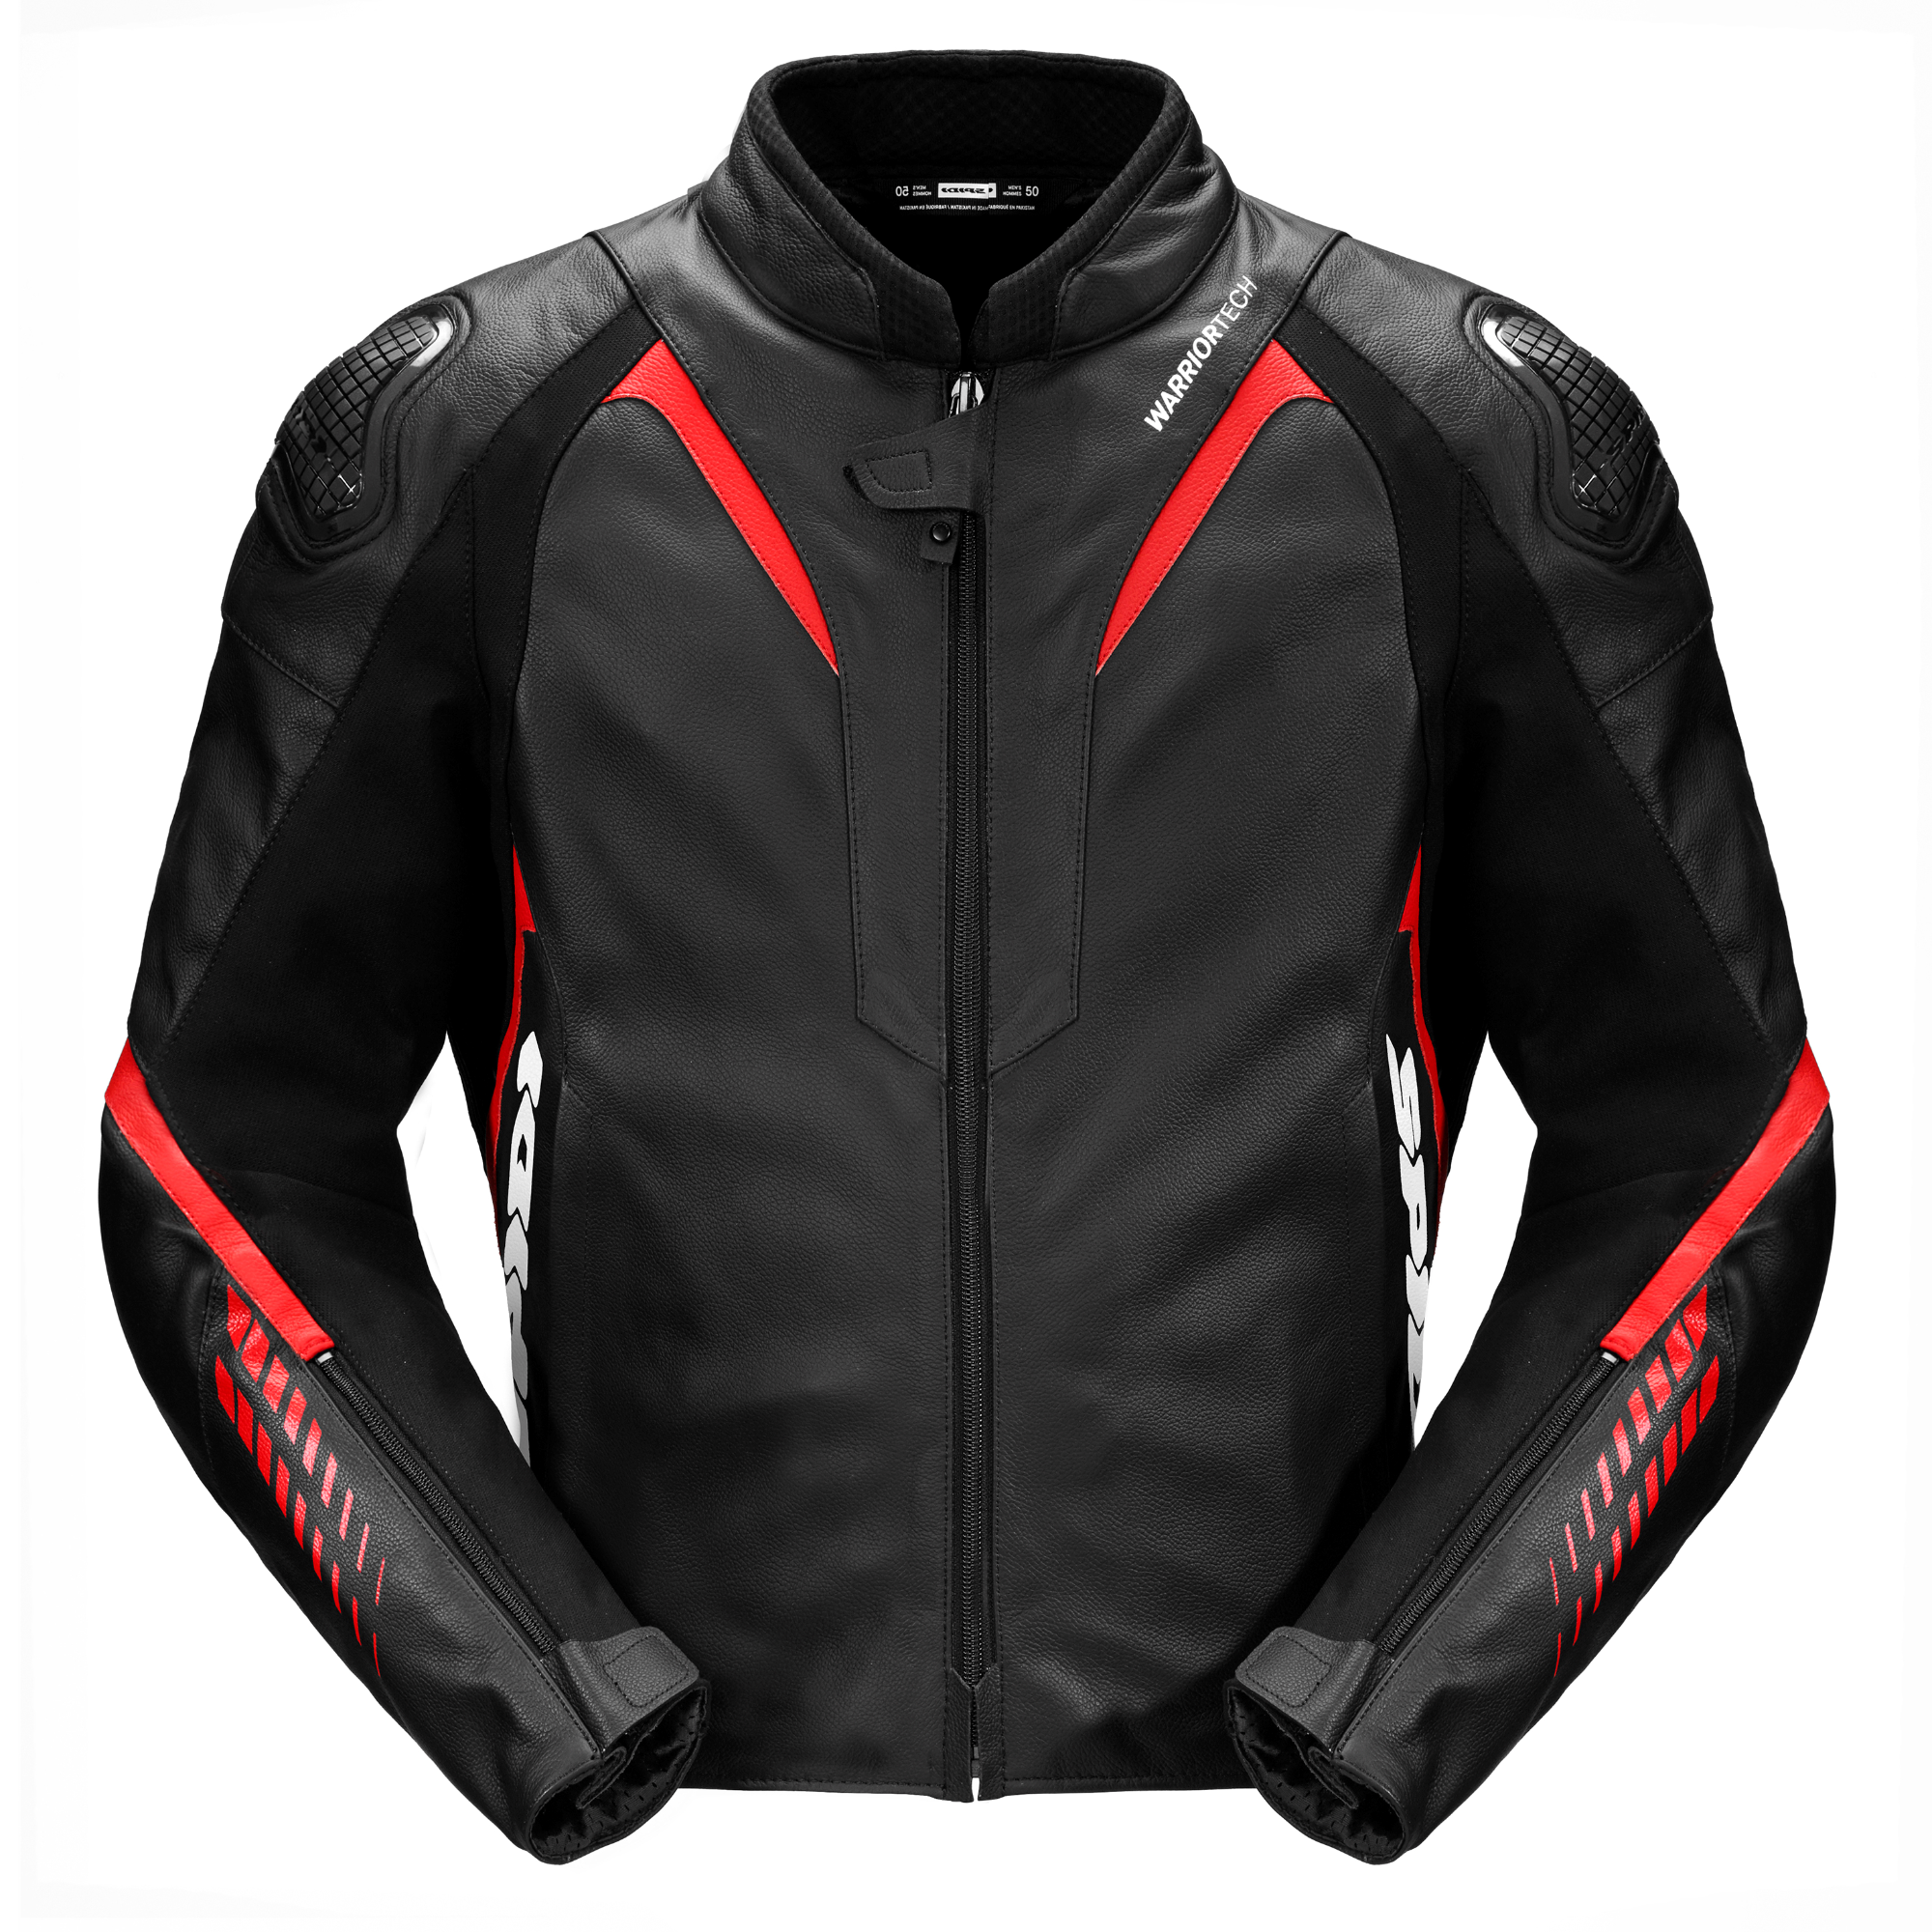 Image of Spidi Nkd-1 Jacket Red Size 46 ID 8030161461749